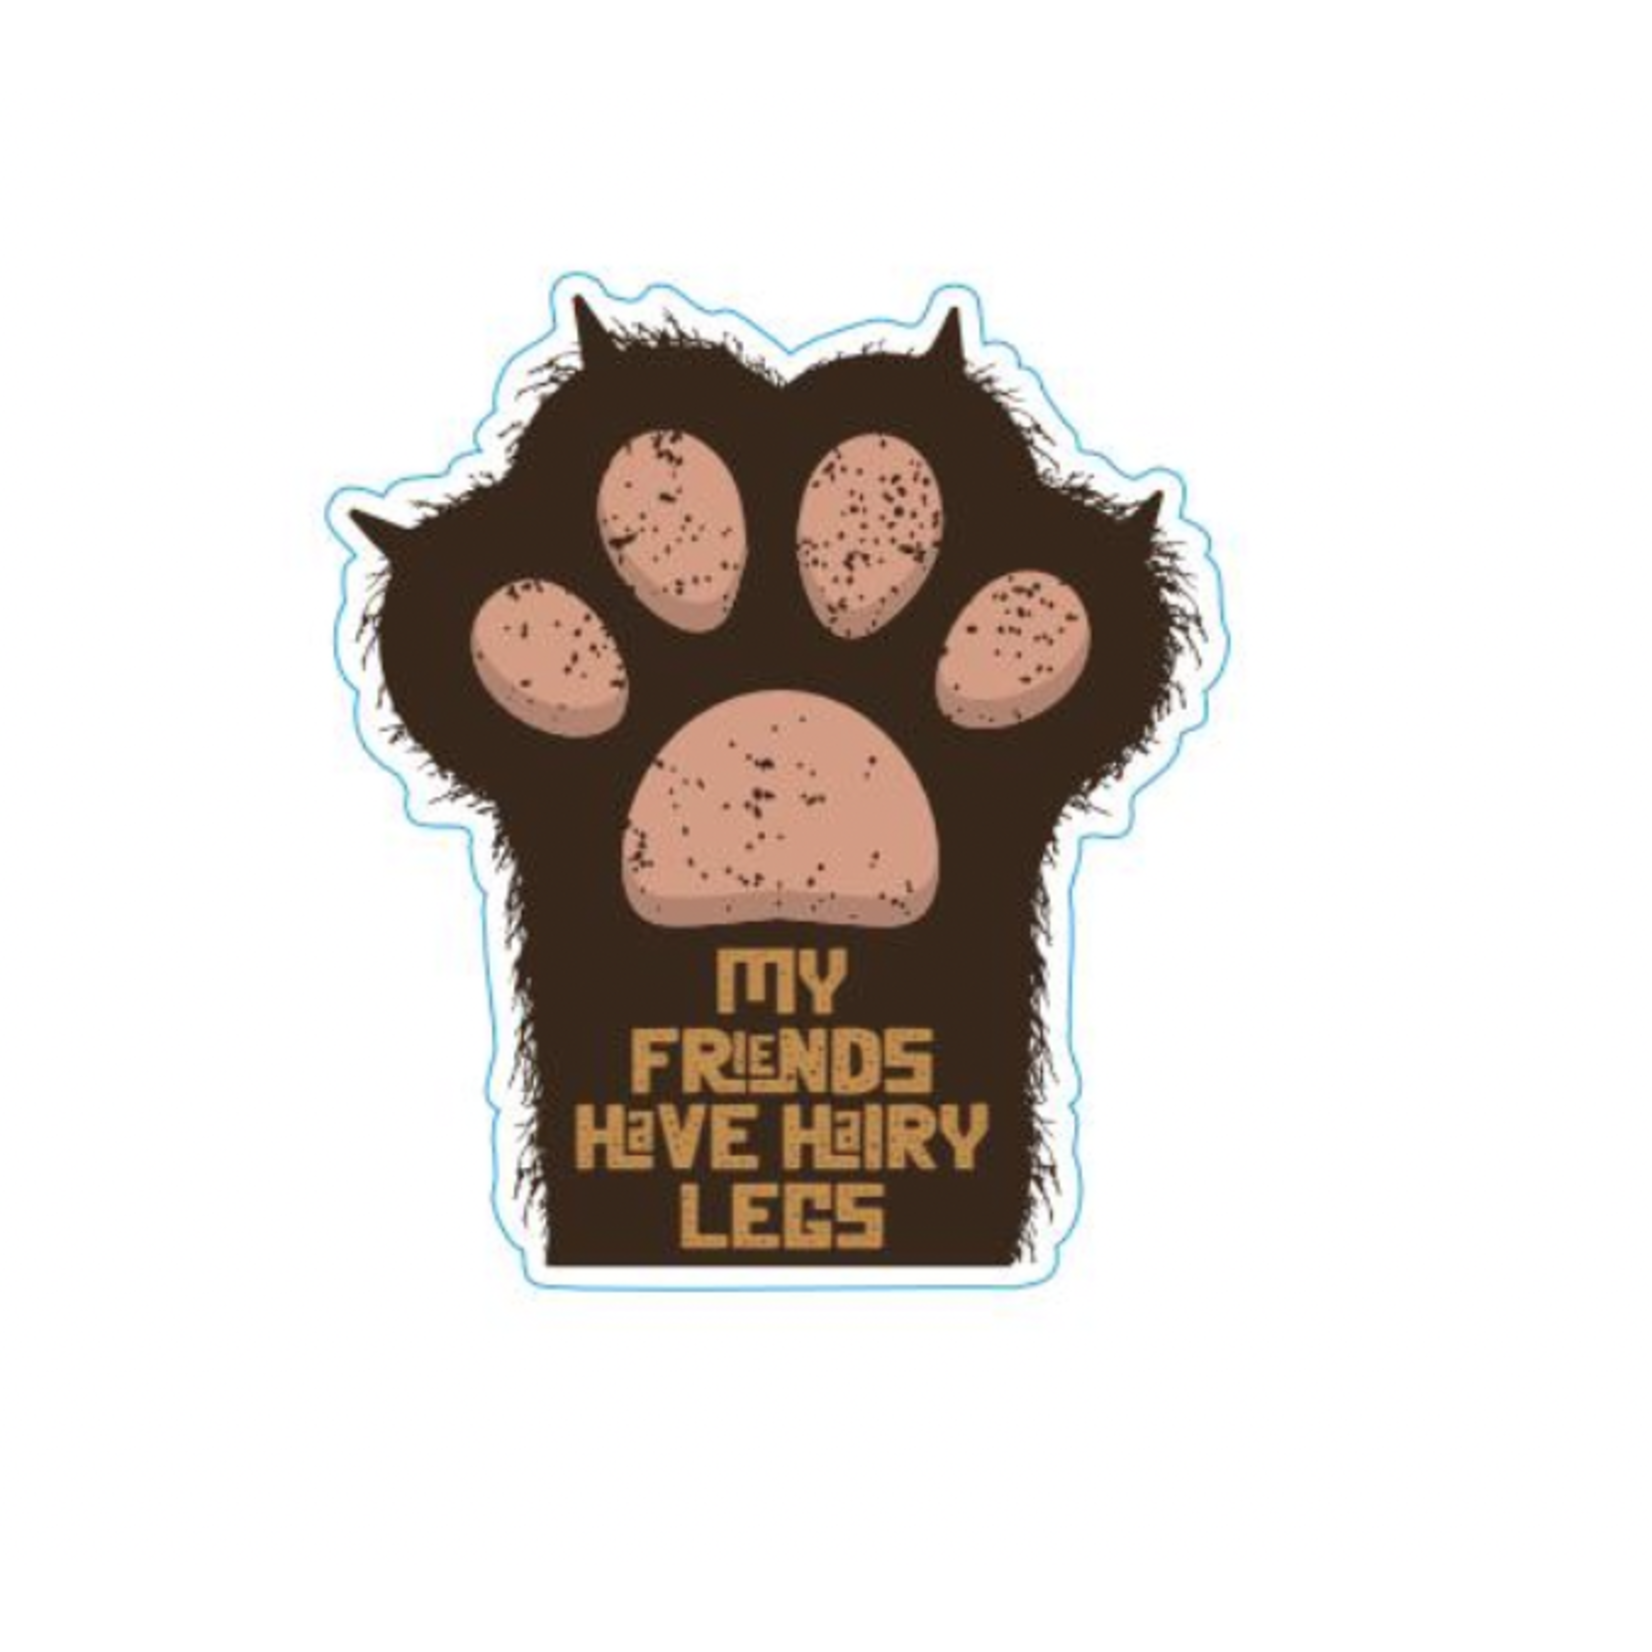 STICKER PACK Cat Sayings - Friends With Hairy Legs - Sticker - Small